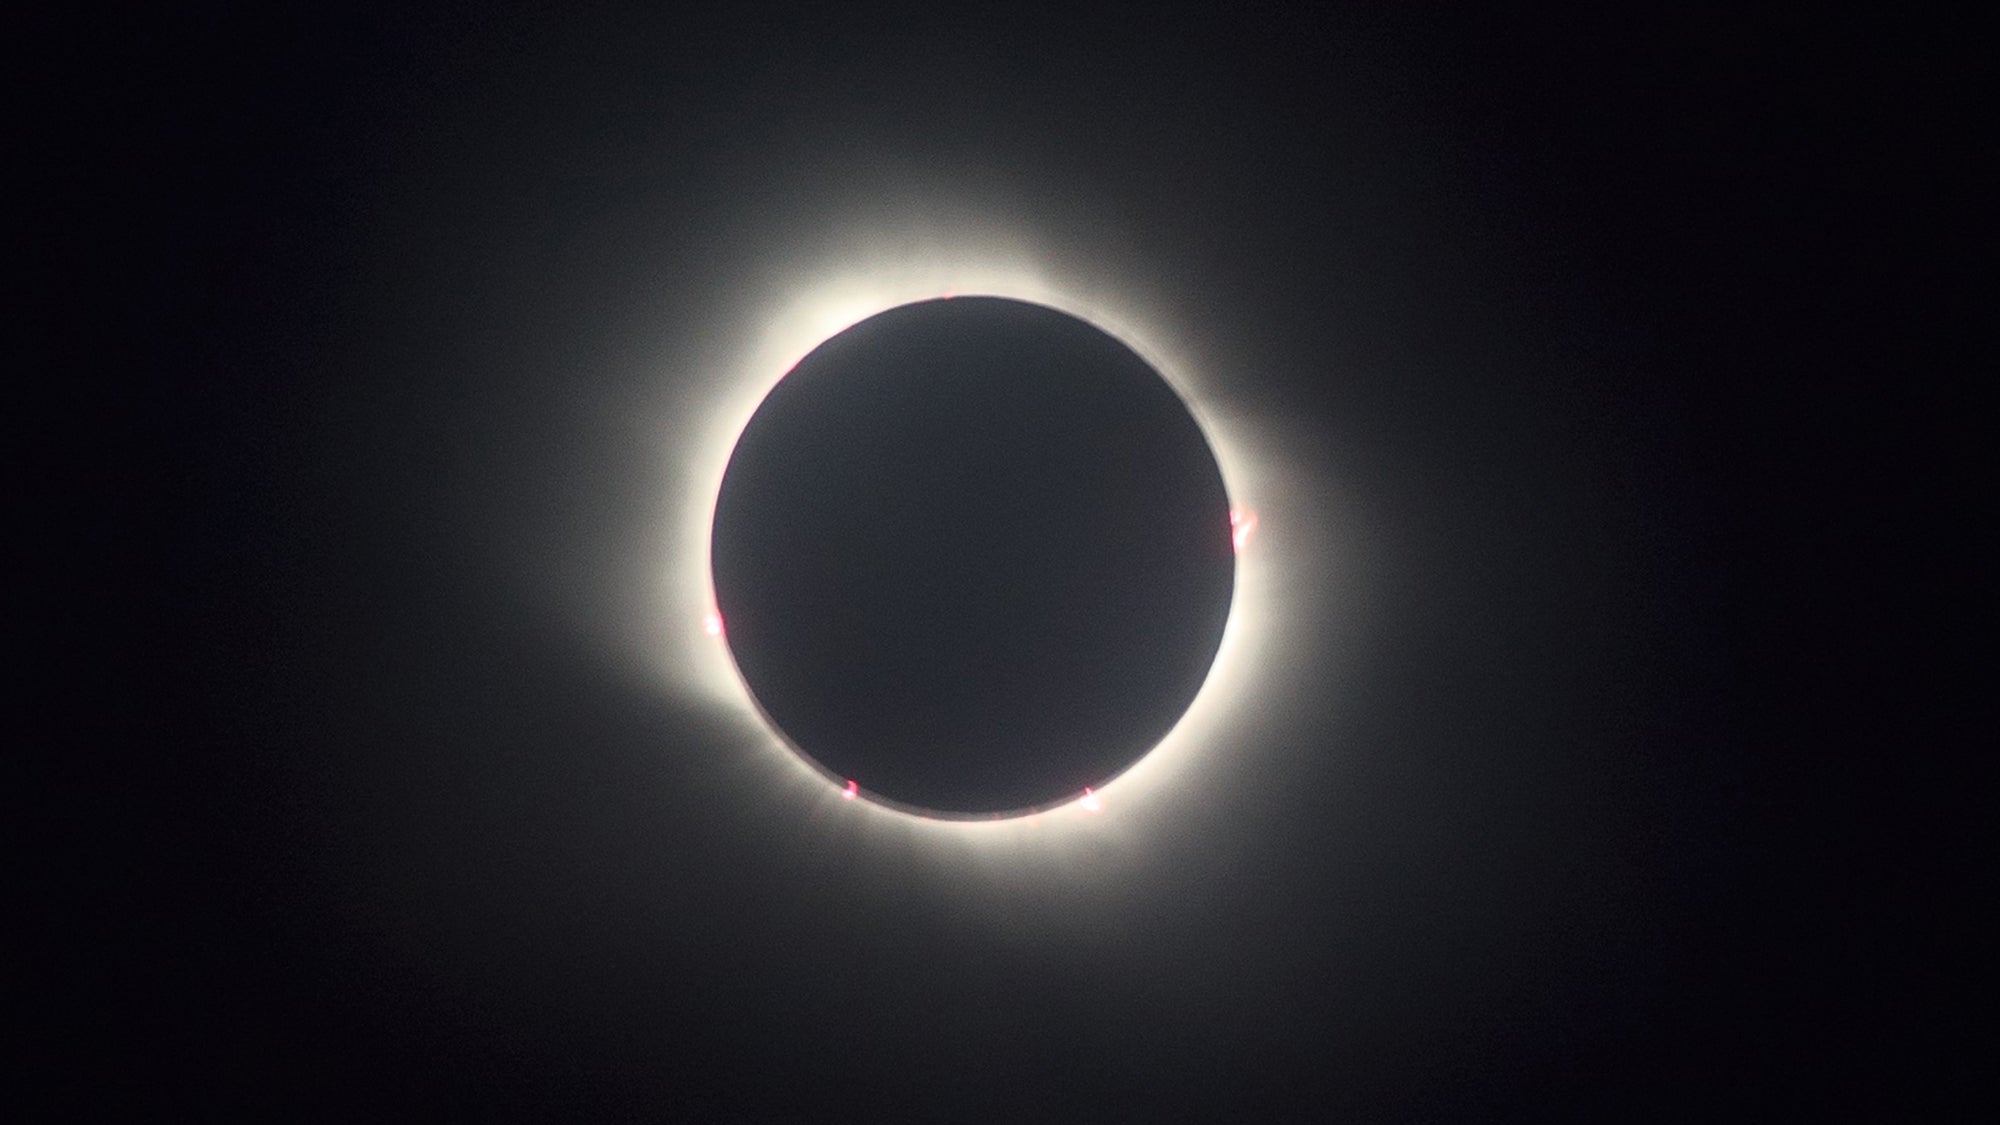 Why do solar eclipses happen?